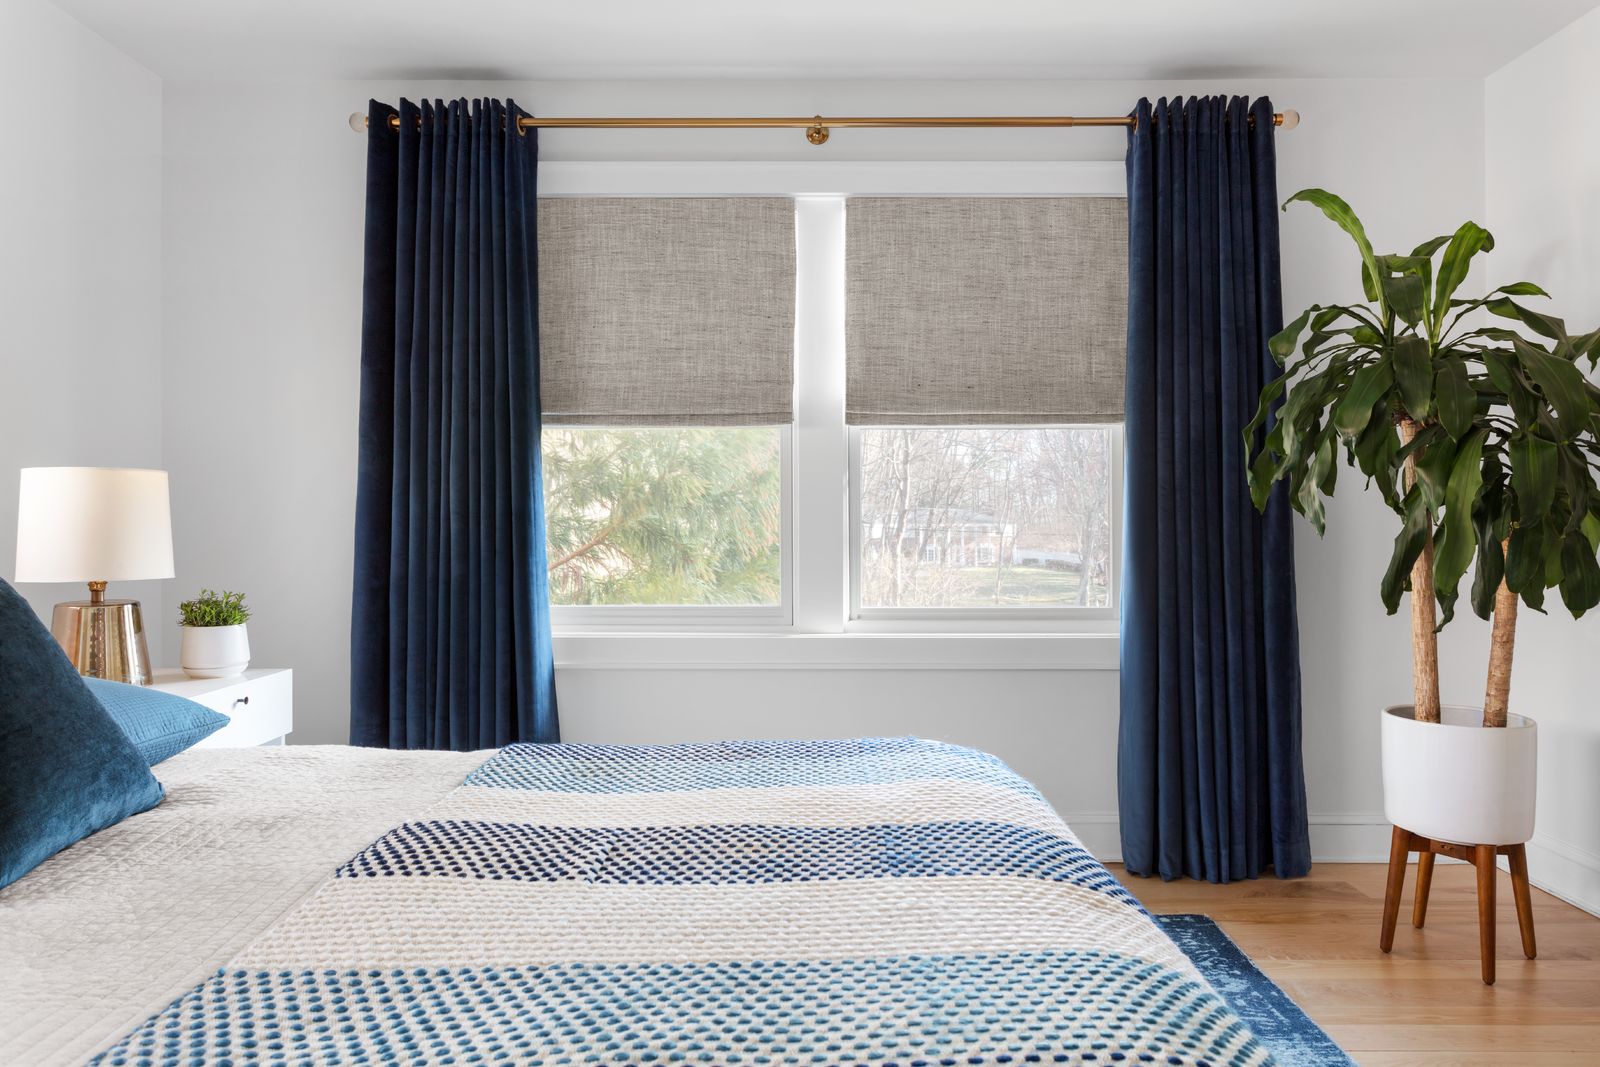 How To Hang Curtains Over Blinds And Shades